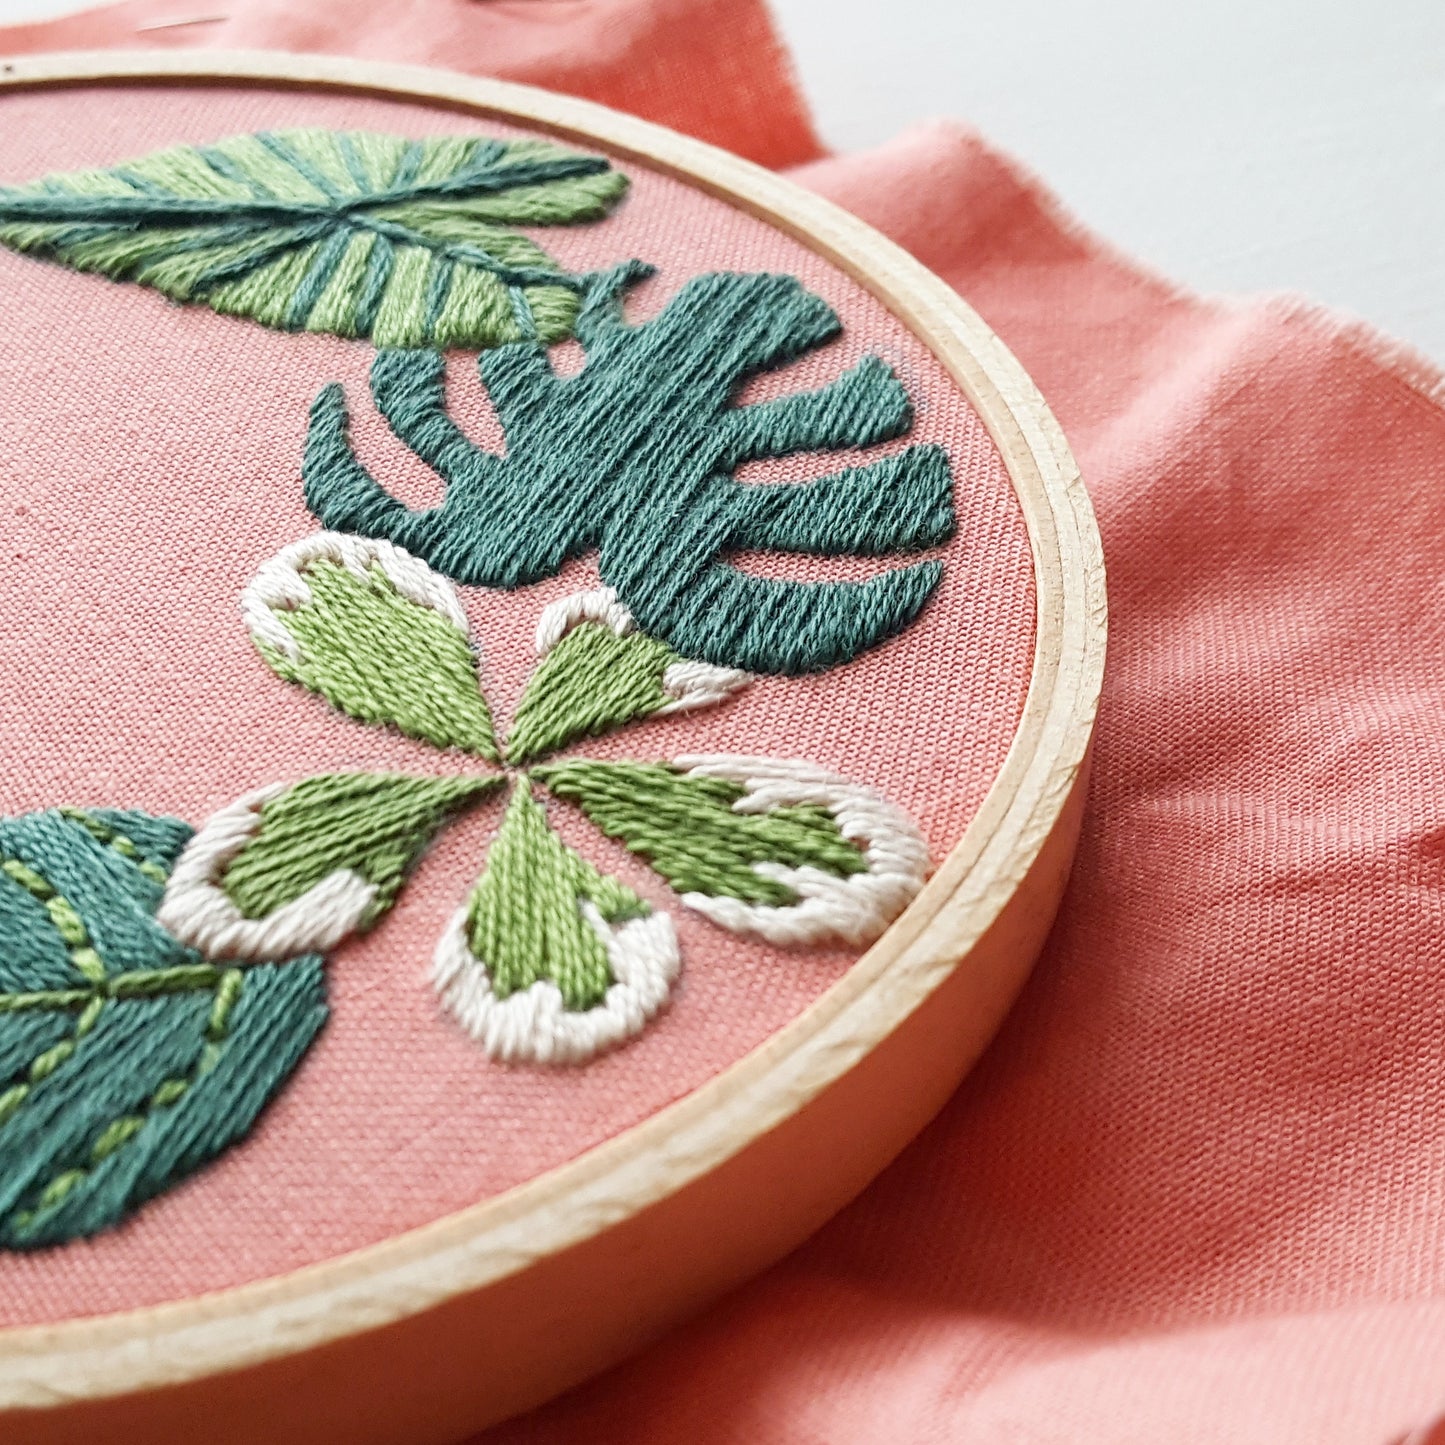 Tropical Plants Hand Embroidery Pattern (PDF)